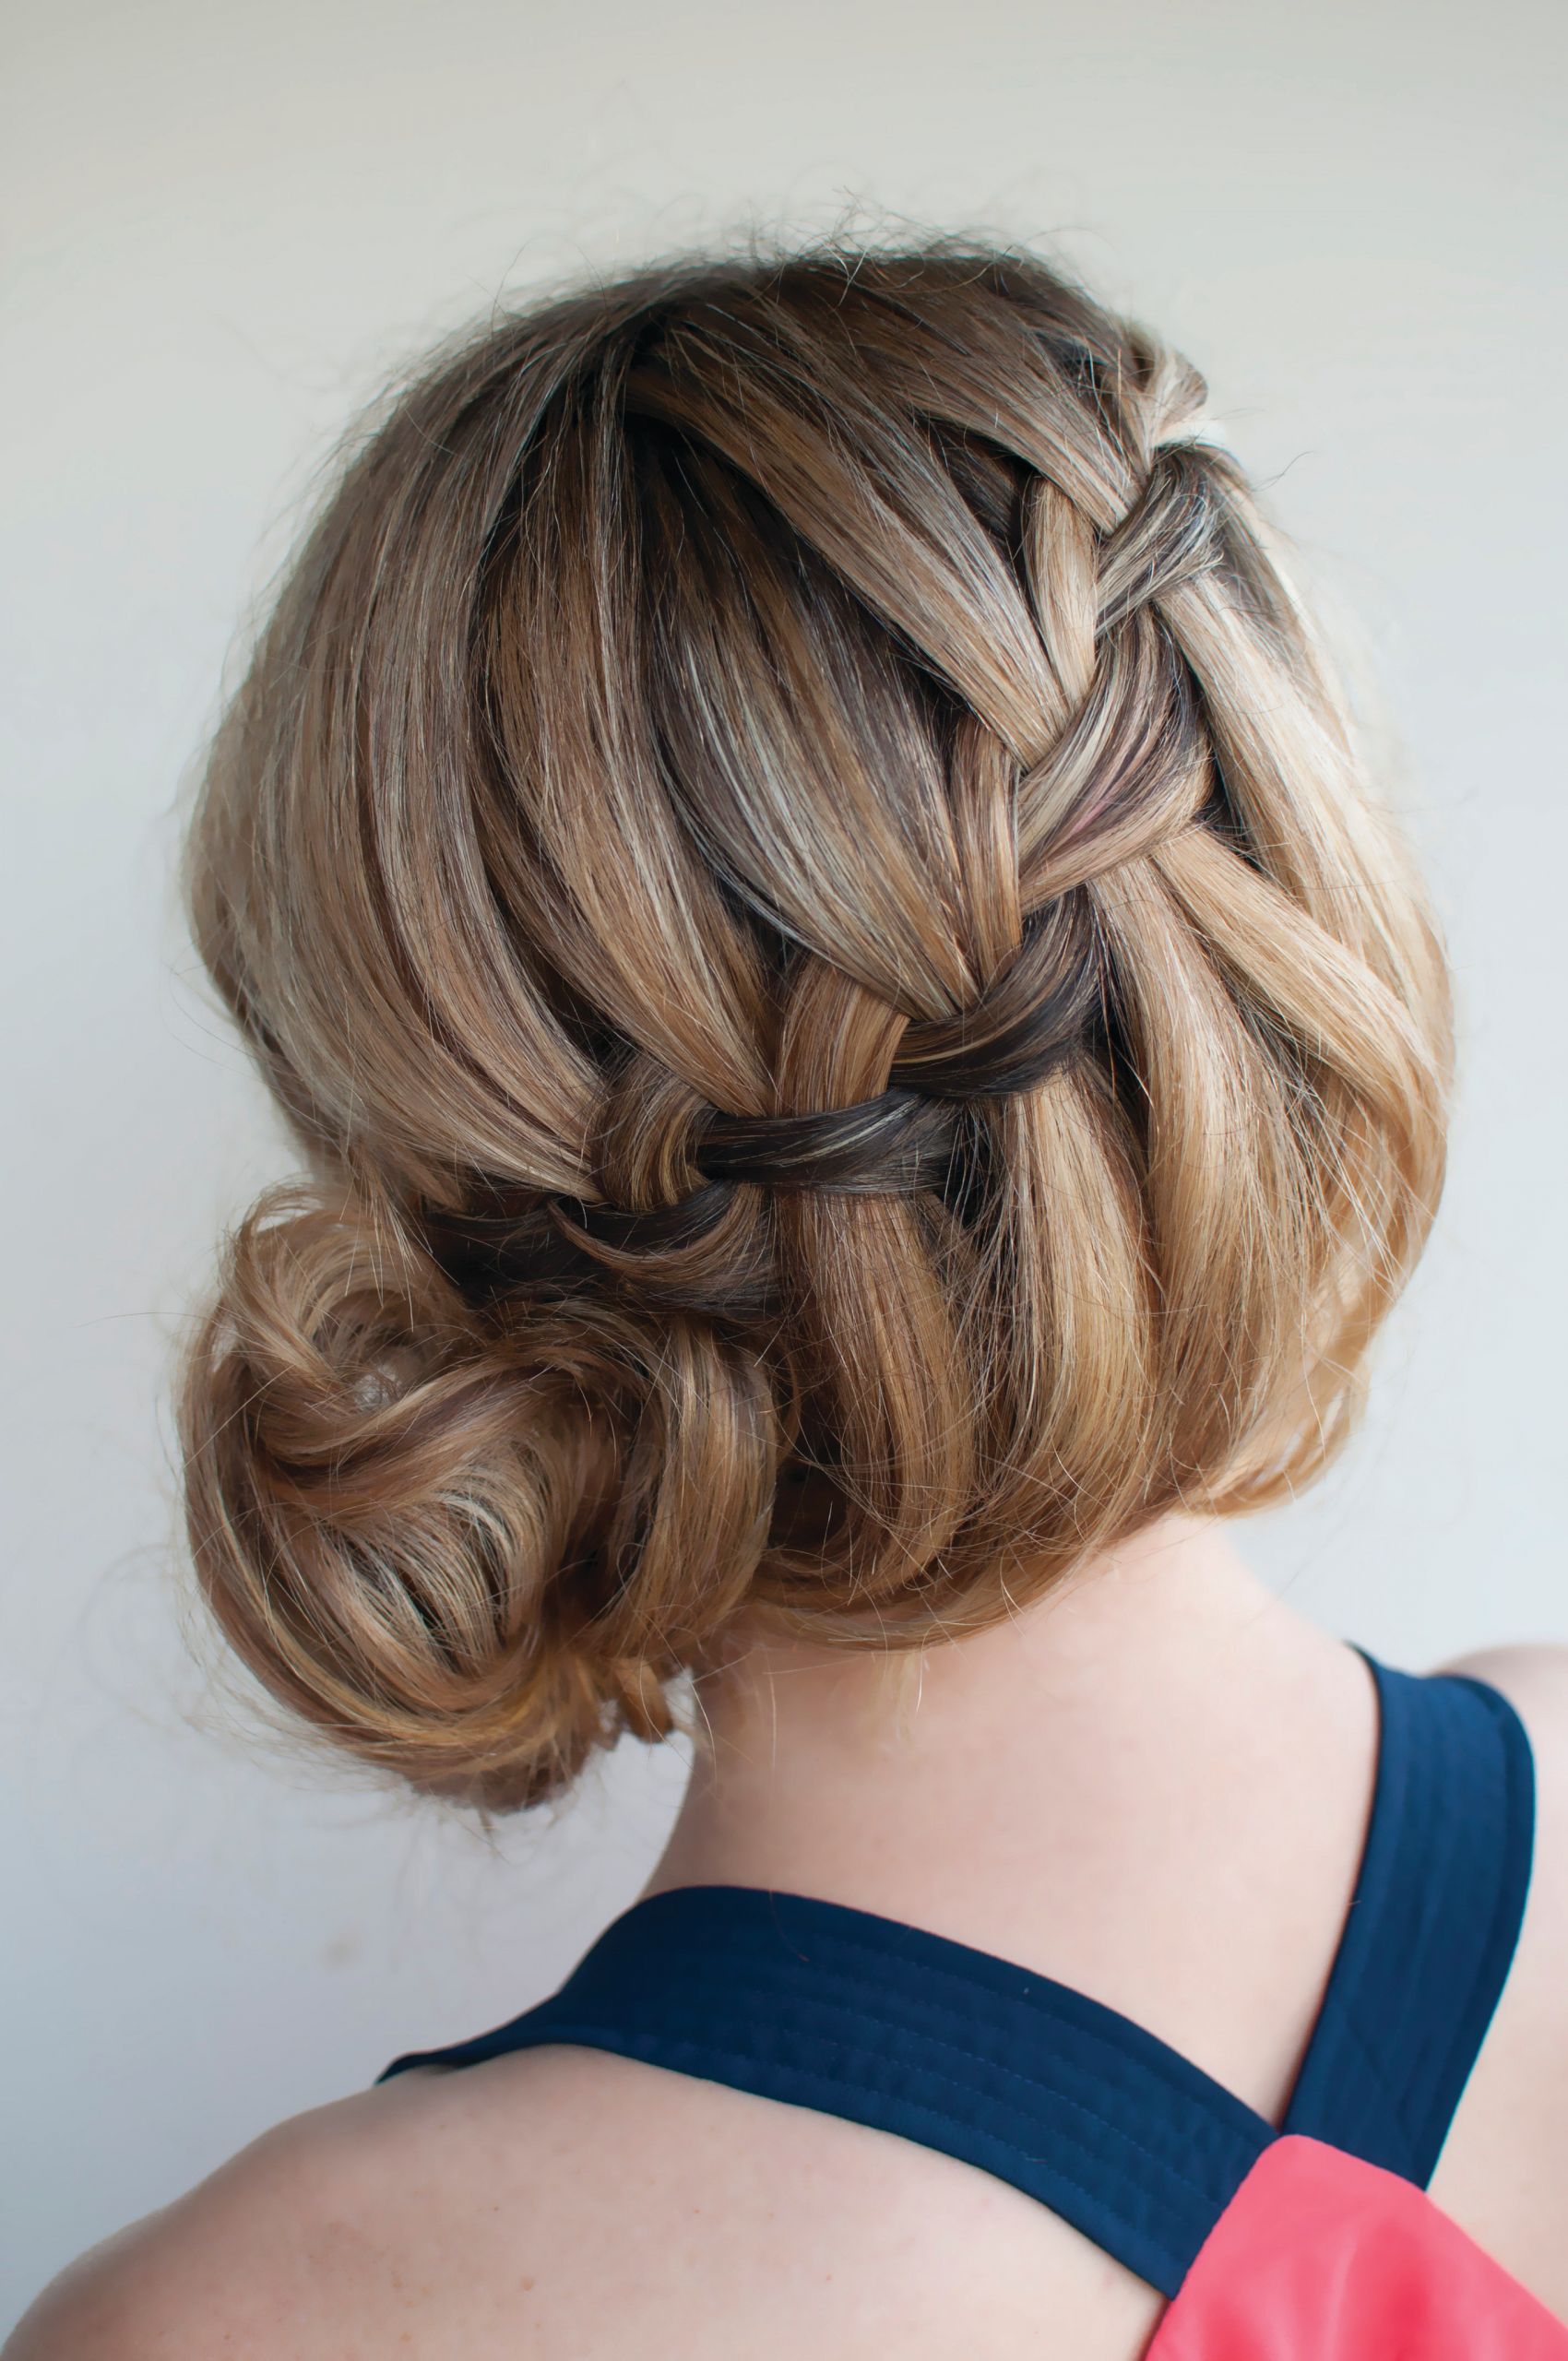 Braid Bun Hairstyles
 Waterfall Bun · Extract from Braids Buns and Twists by